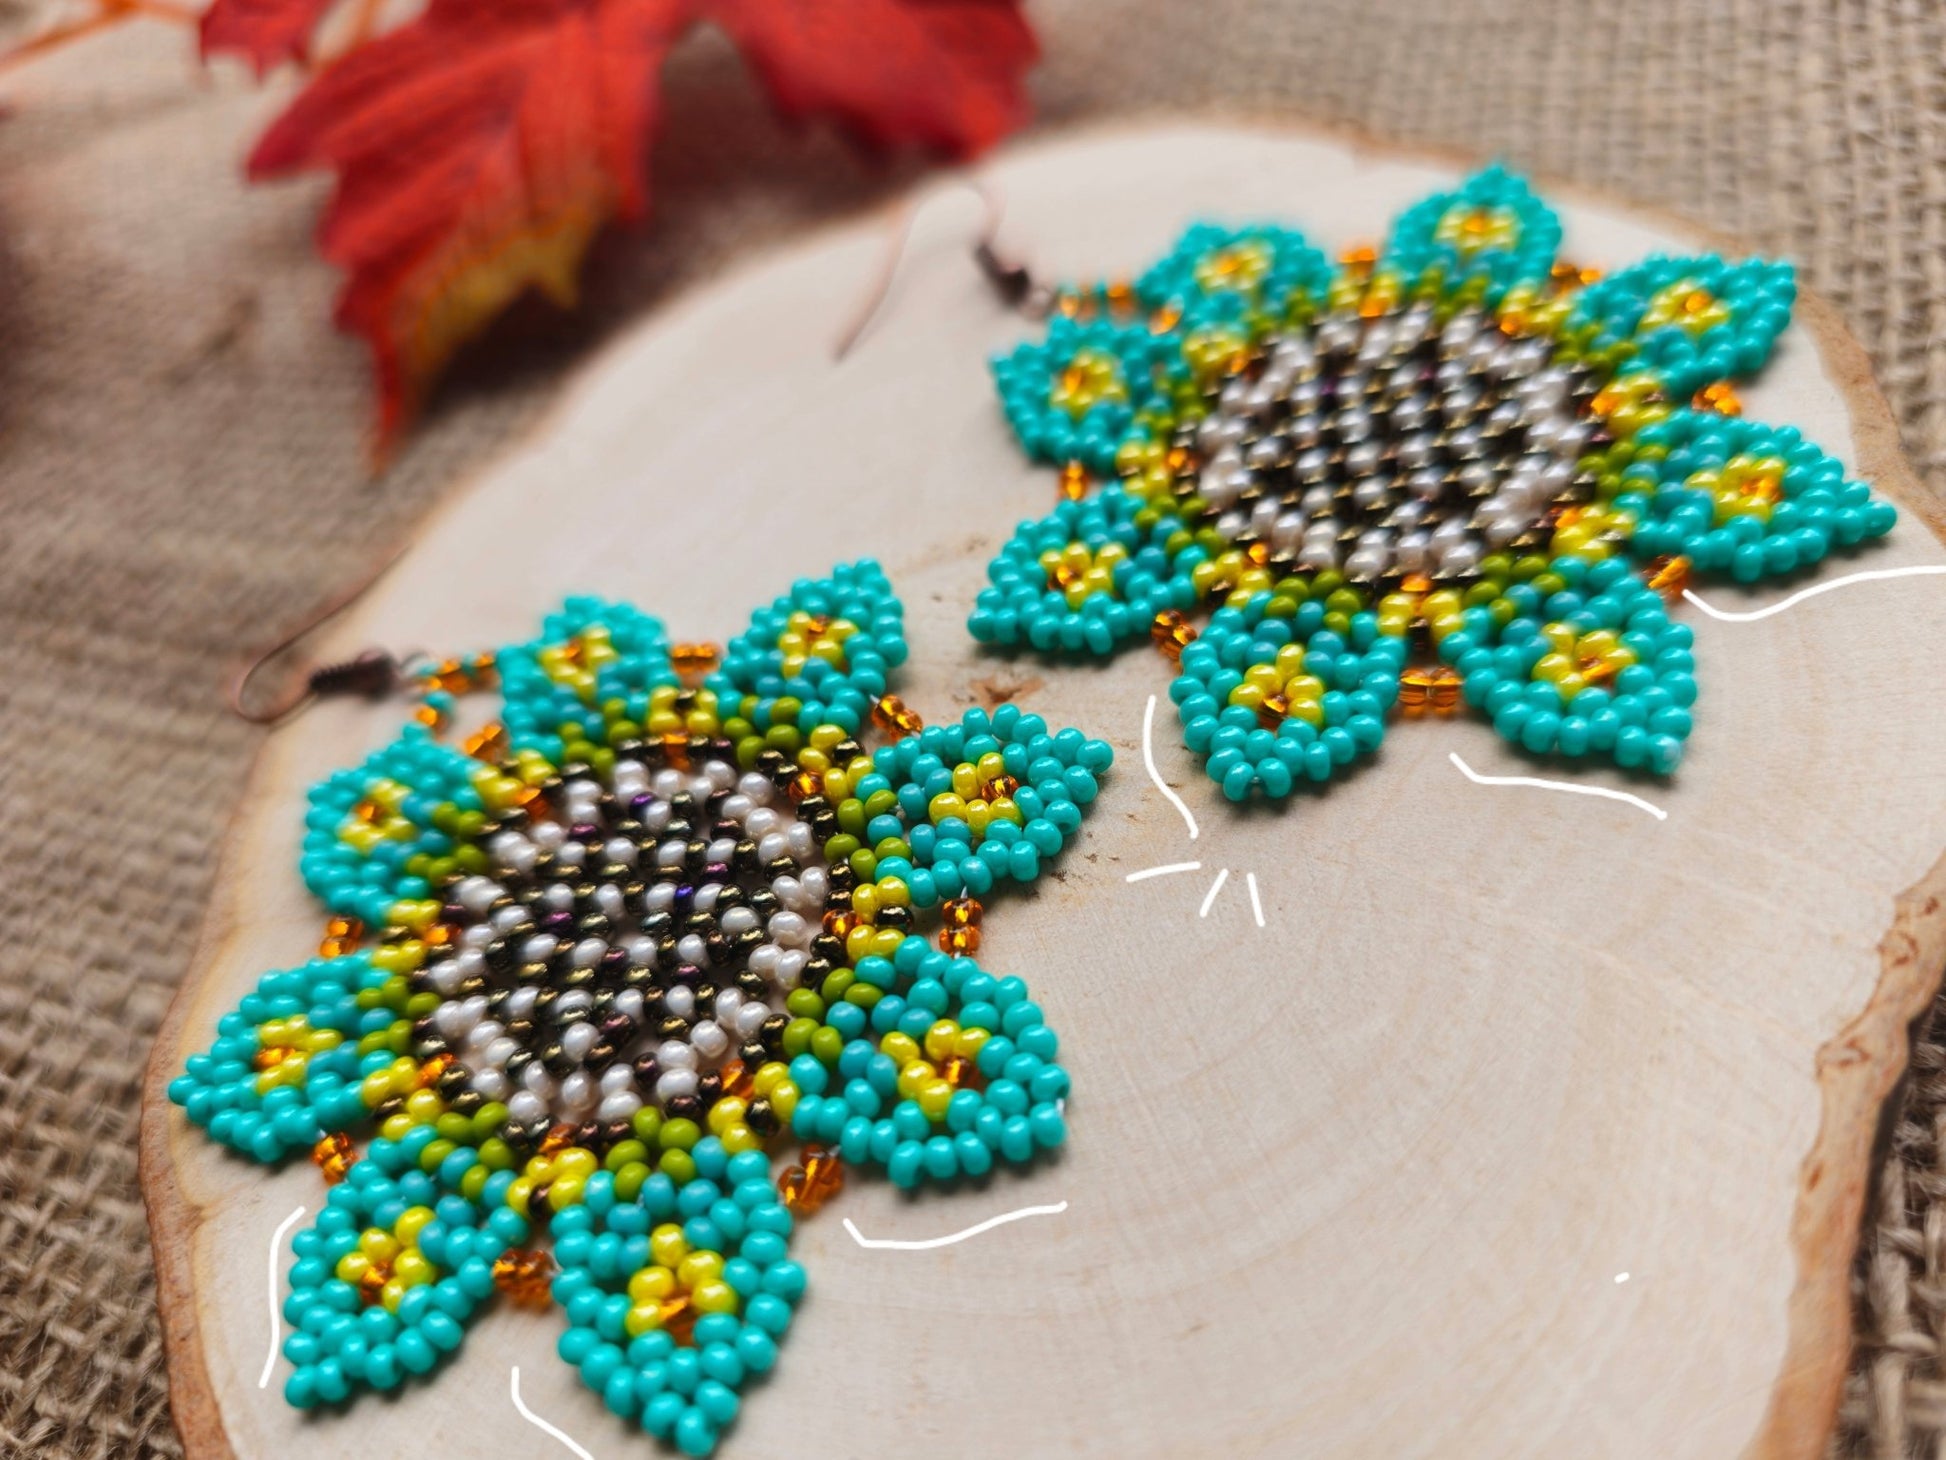 🍁 NEW COLLECTION 🍁 🌸🍂Autumn Blossom Harmony Earrings 🌸🍁 - TripingLH